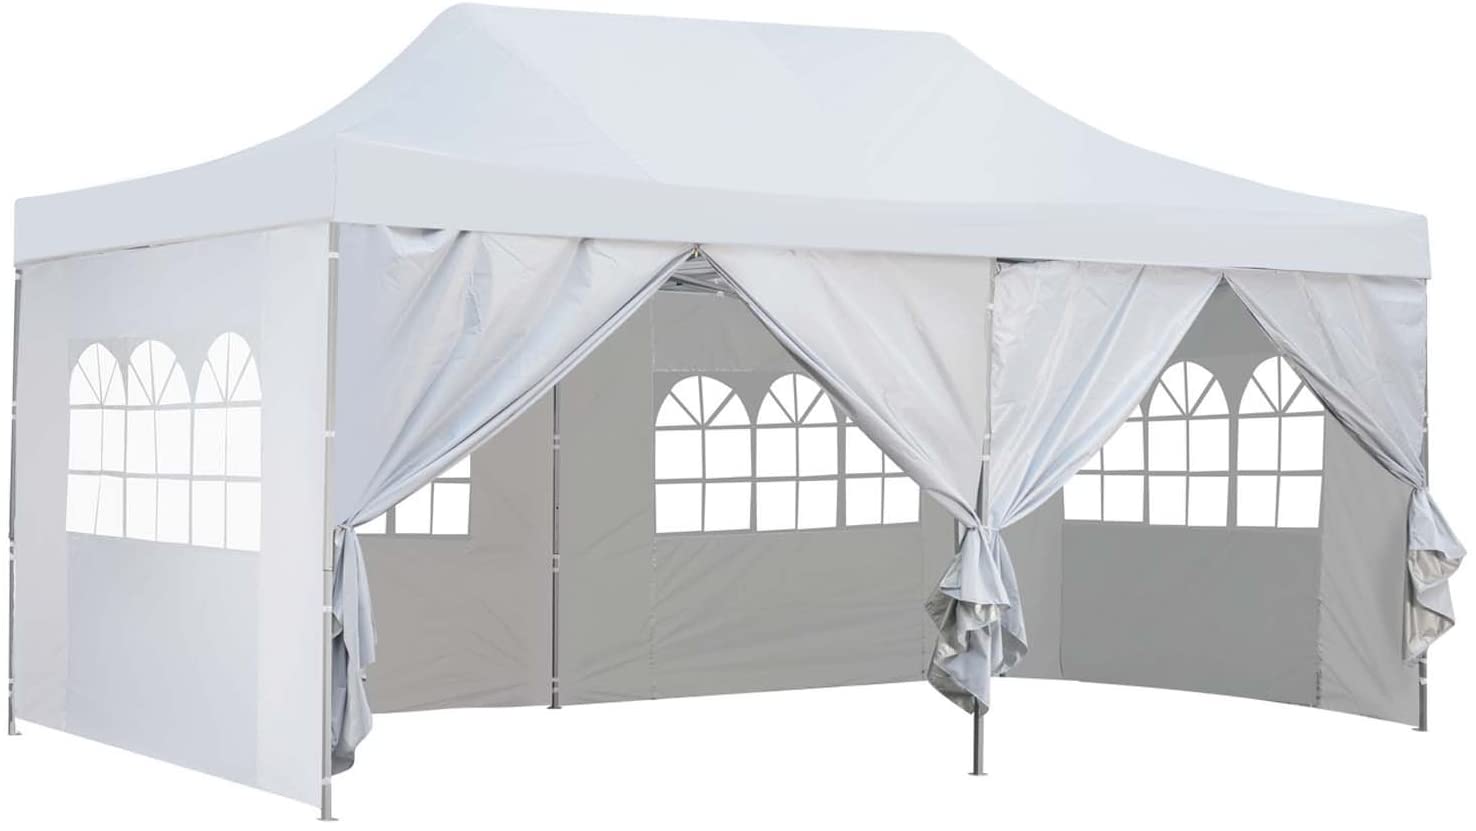 Outdoor Basic Water Resistant Canopy Tent With Sidewalls